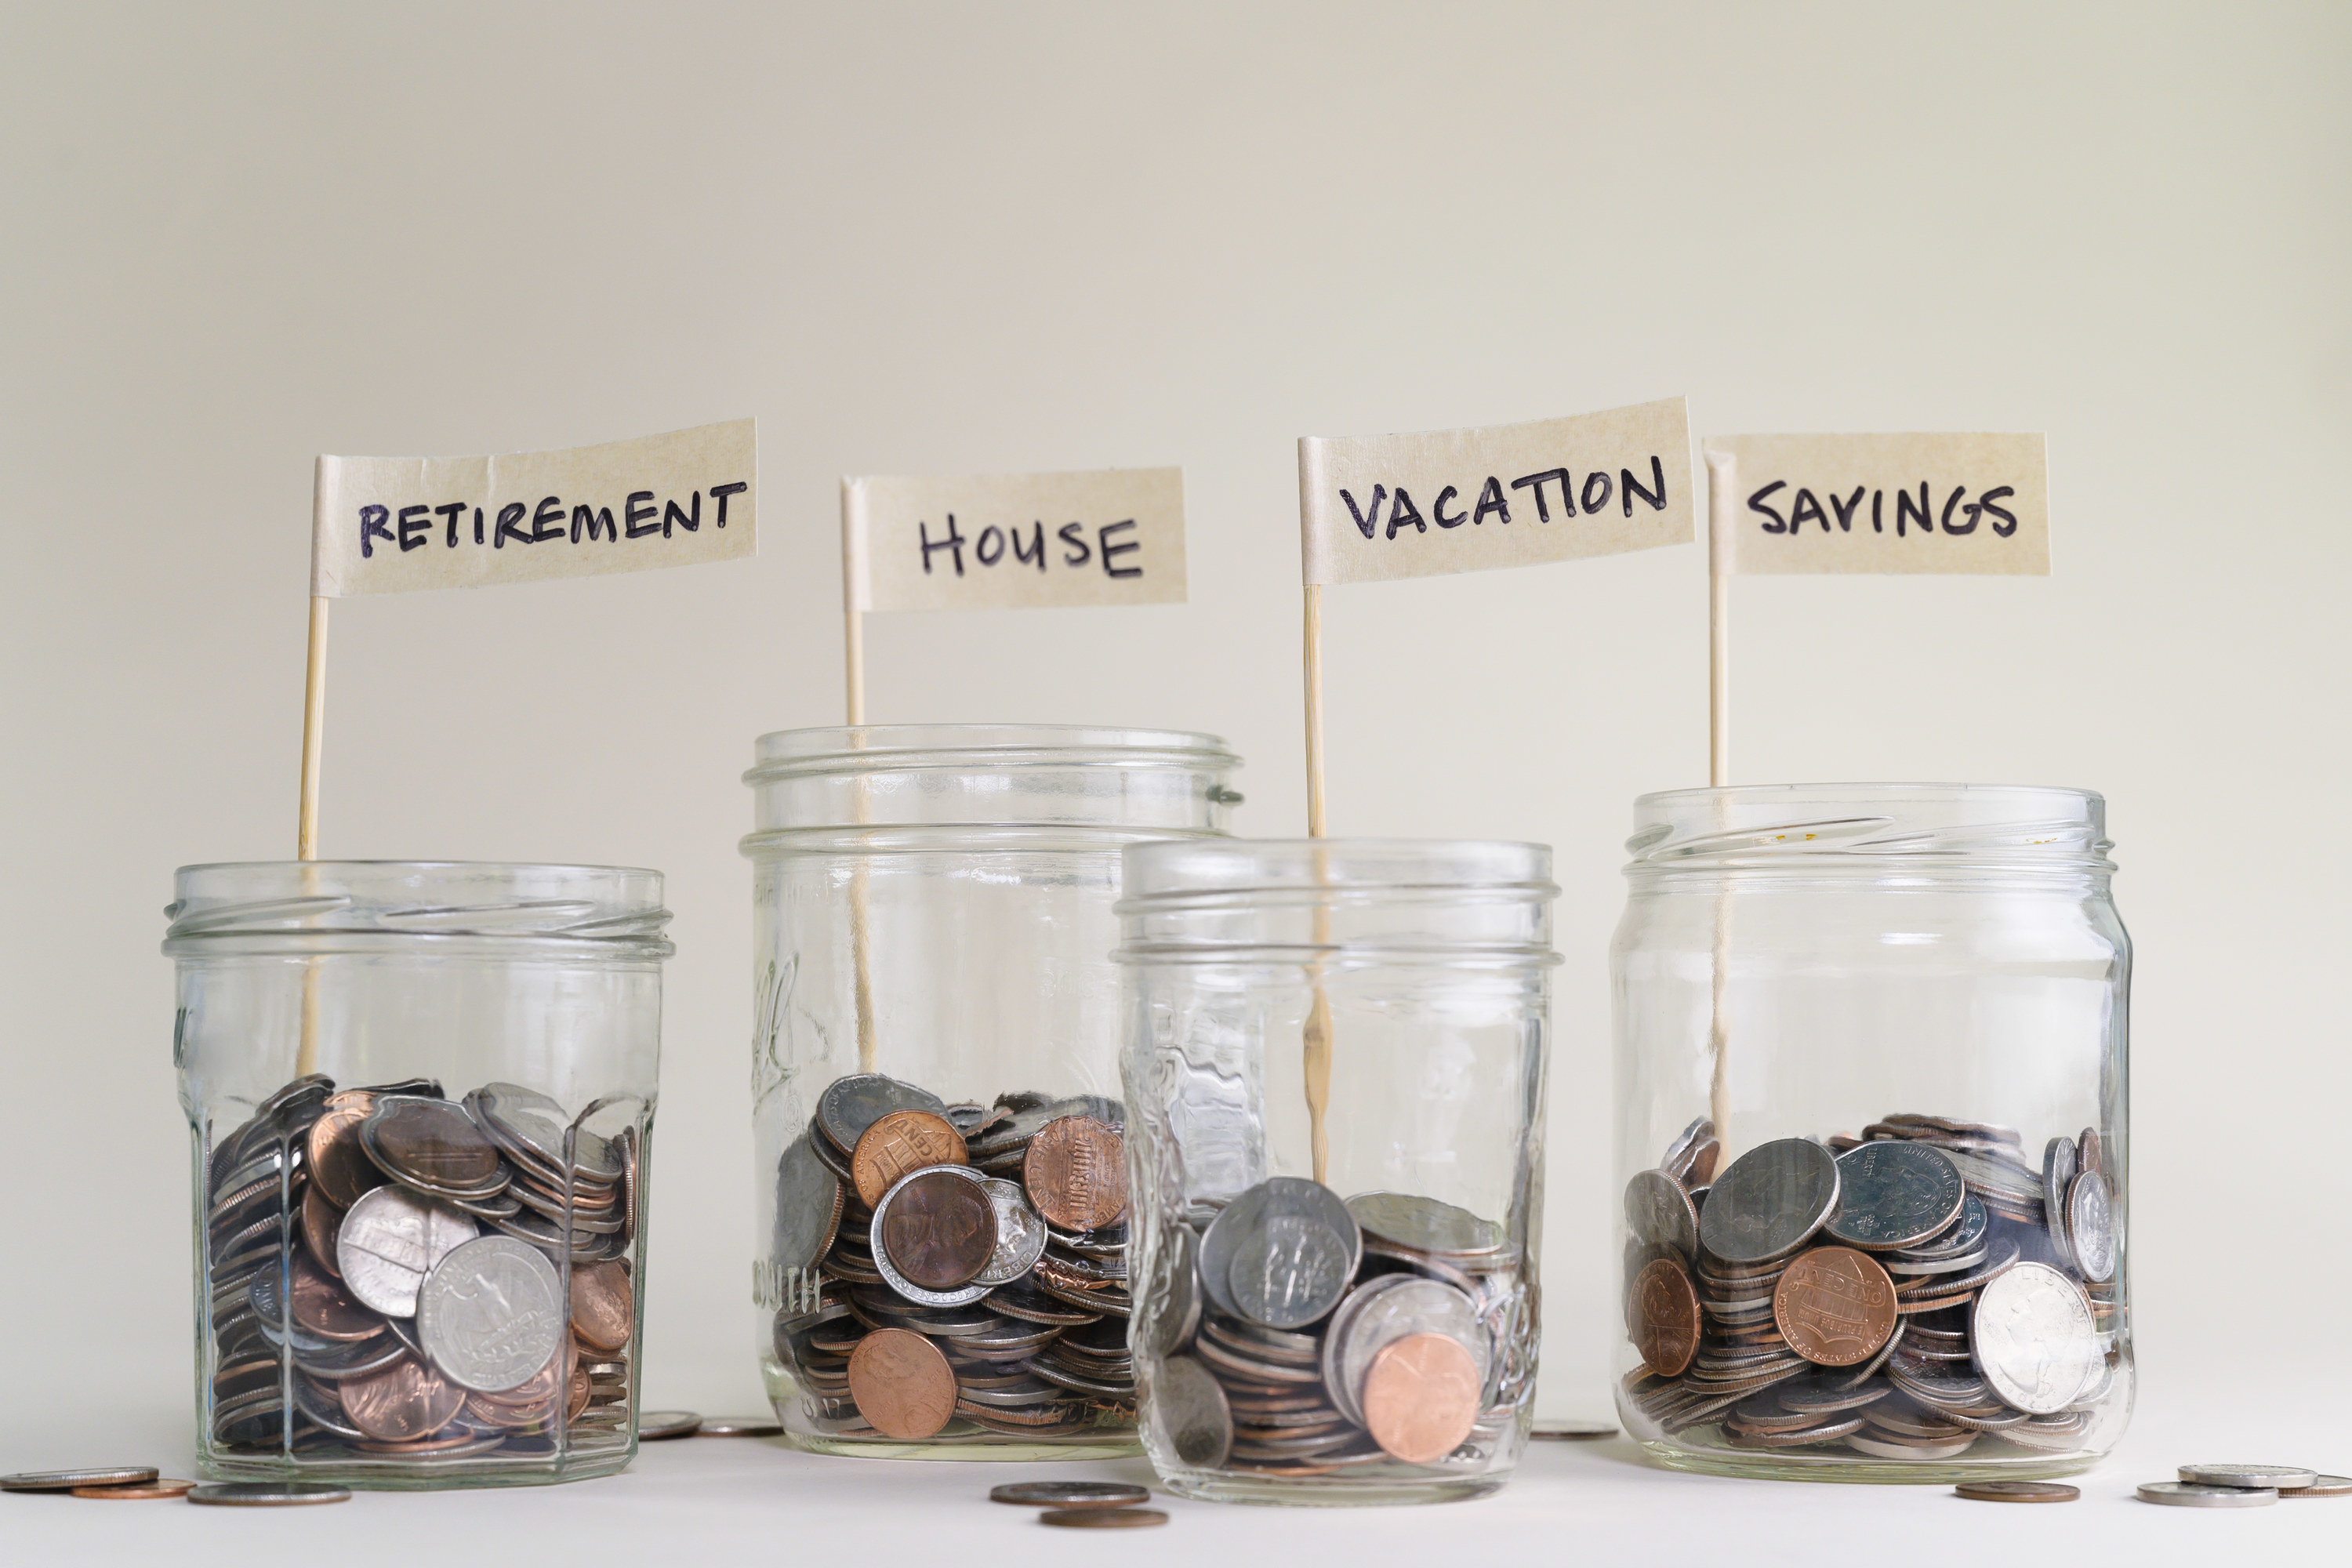 Jars of coins labeled with the savings categories: retirement, house, vacation, and savings